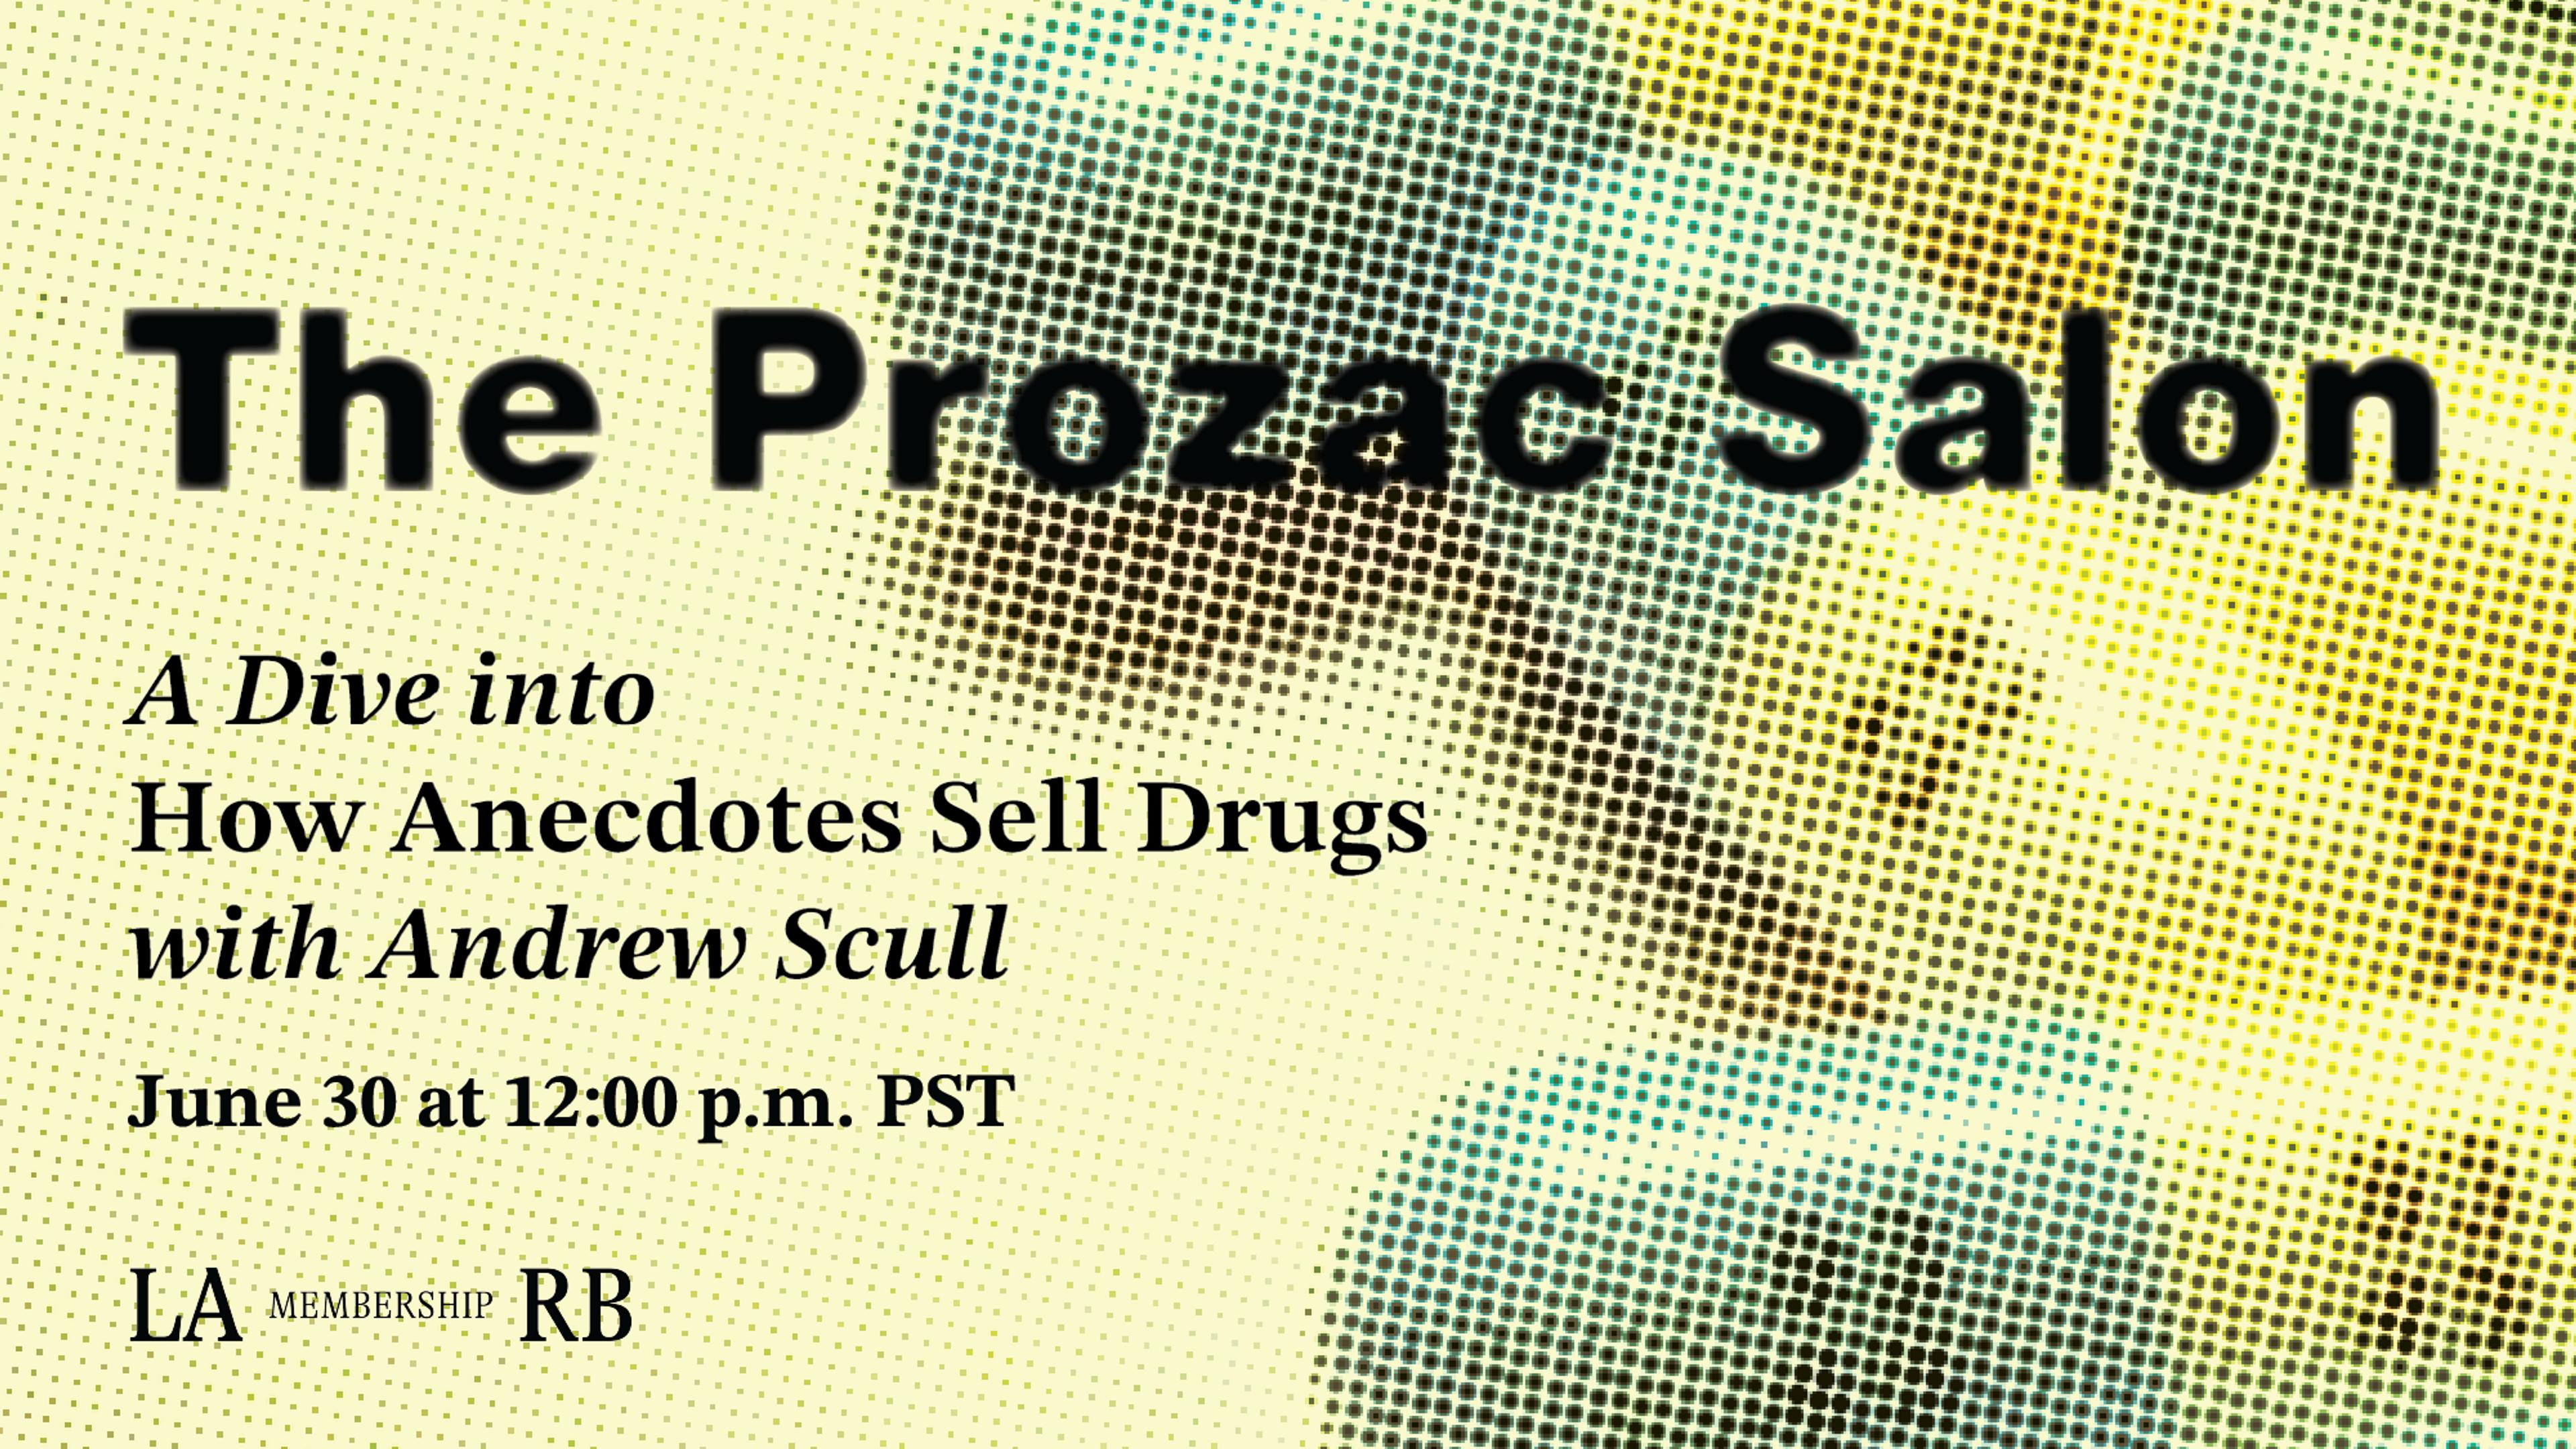 Looking for a deep dive? Read and discuss “How Anecdotes Sell Drugs” with us!